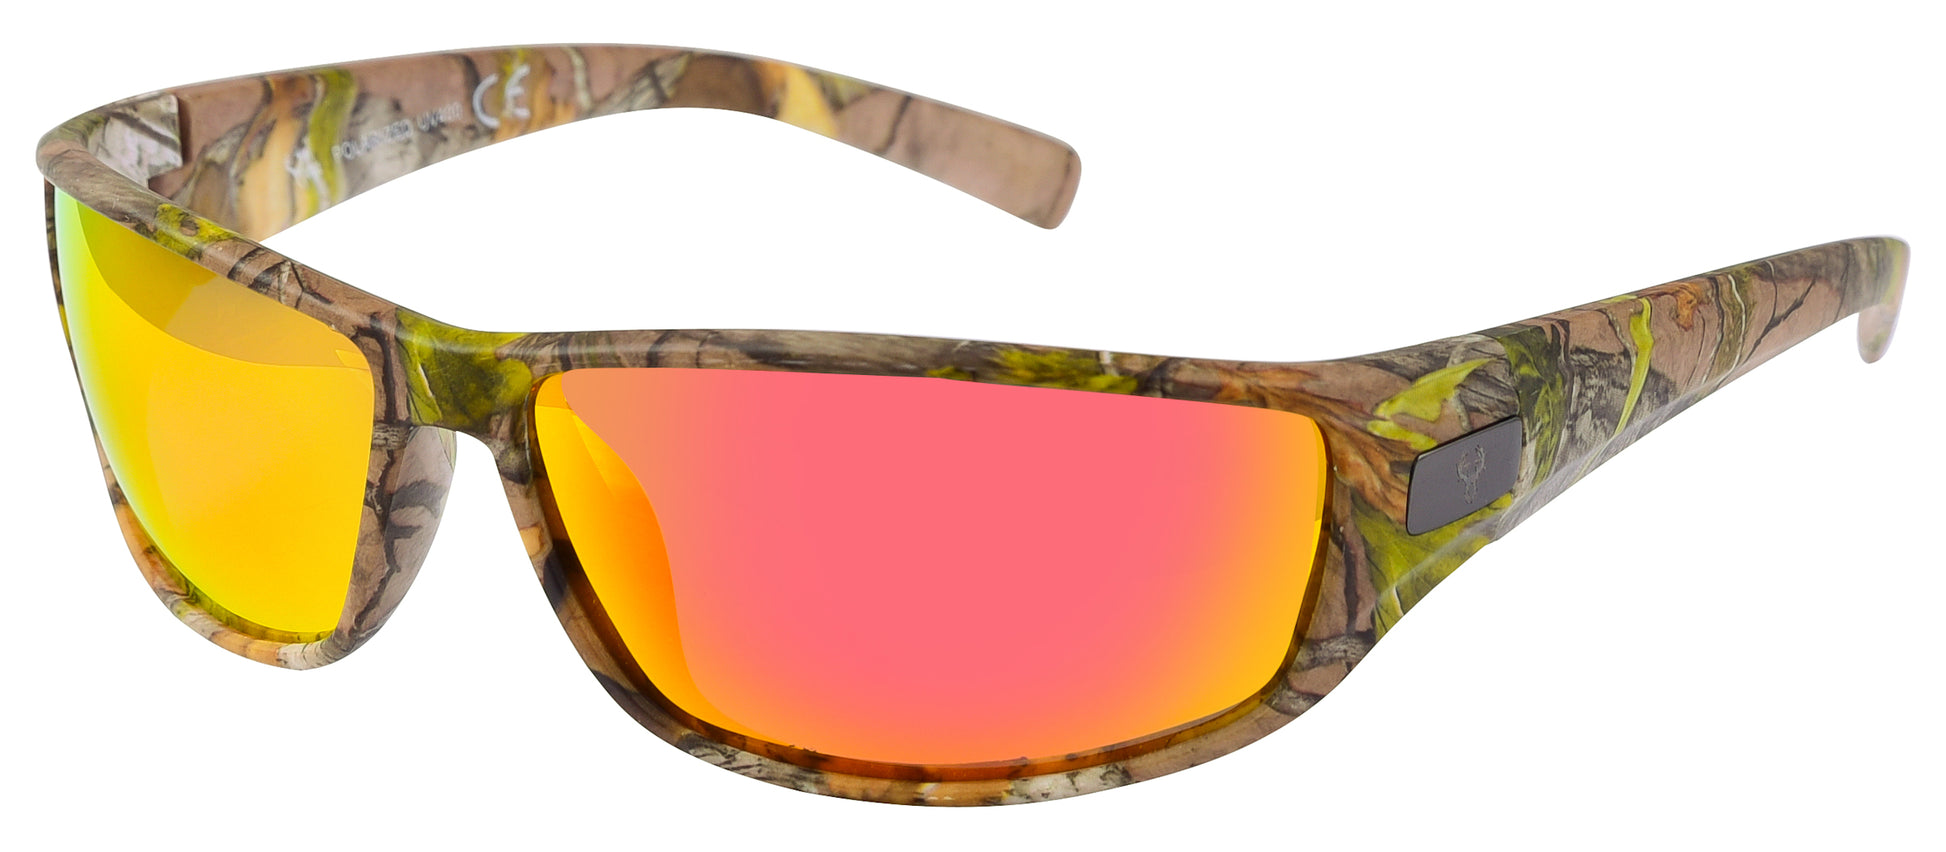 Hornz Brown Forest Camouflage Polarized Sunglasses for Men - WhiteTail -  Free Matching Microfiber Pouch - Brown Camo Frame - Fire Orange Lens –  Hornz Camo